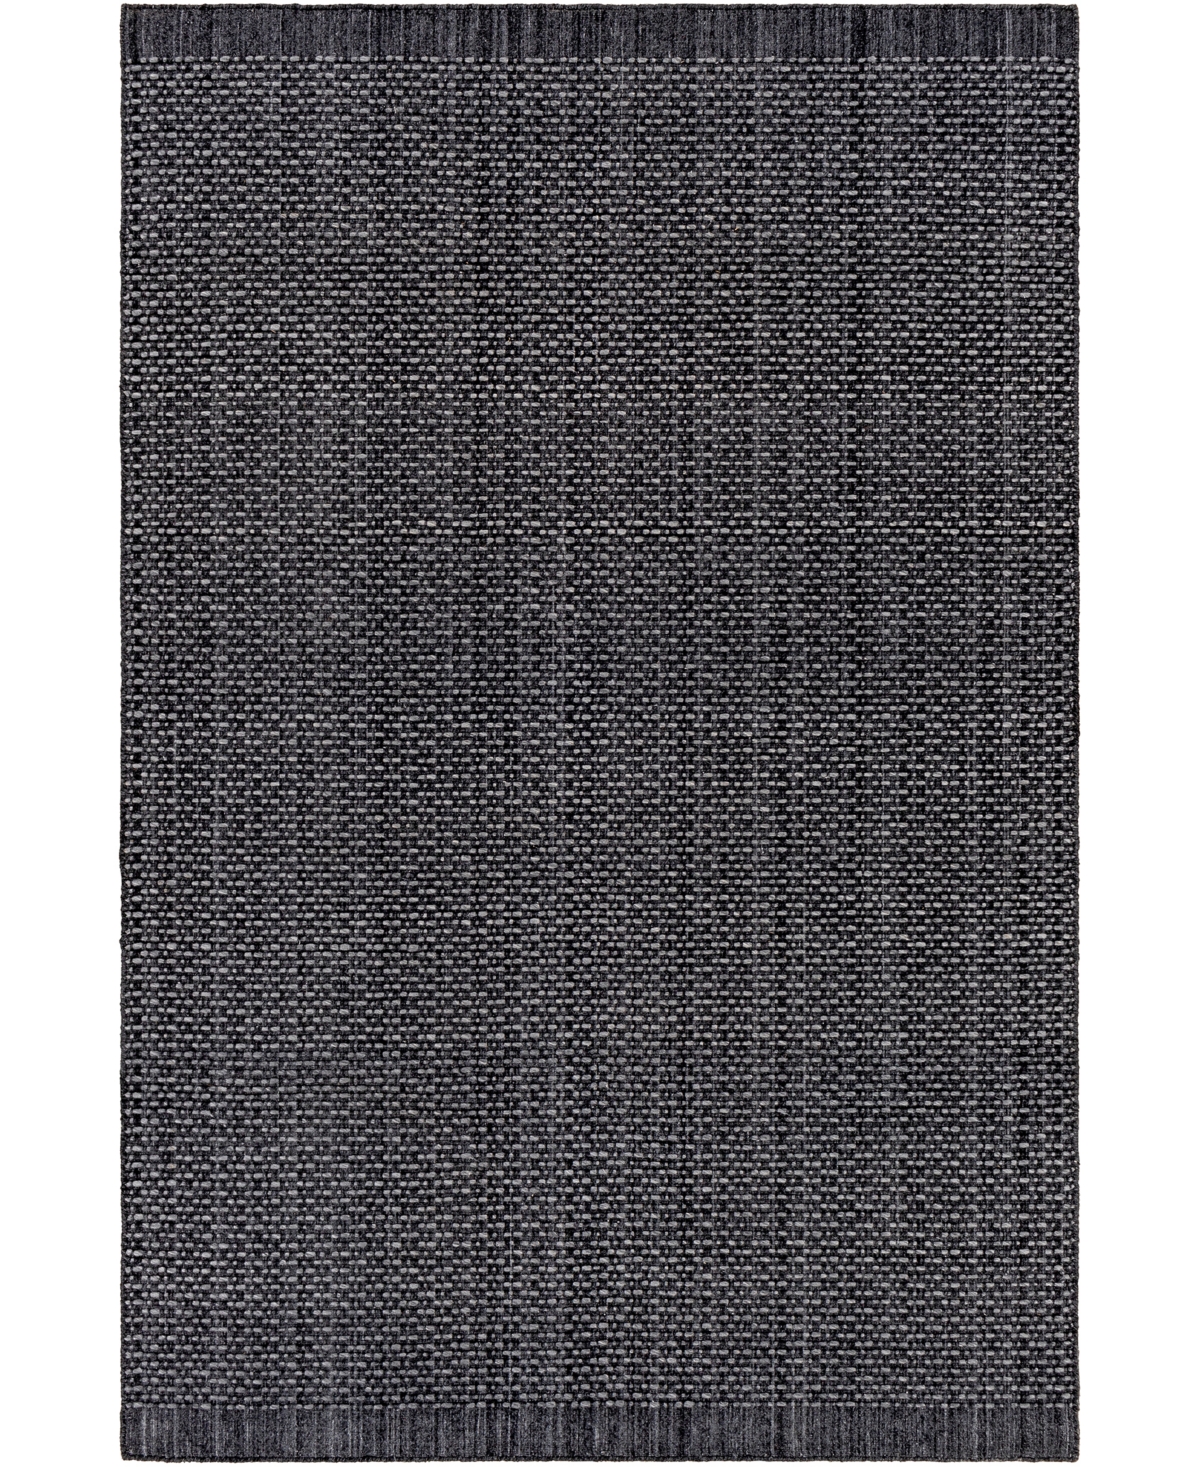 Surya Sycamore Syc-2302 6in x 9' Outdoor Area Rug - Charcoal